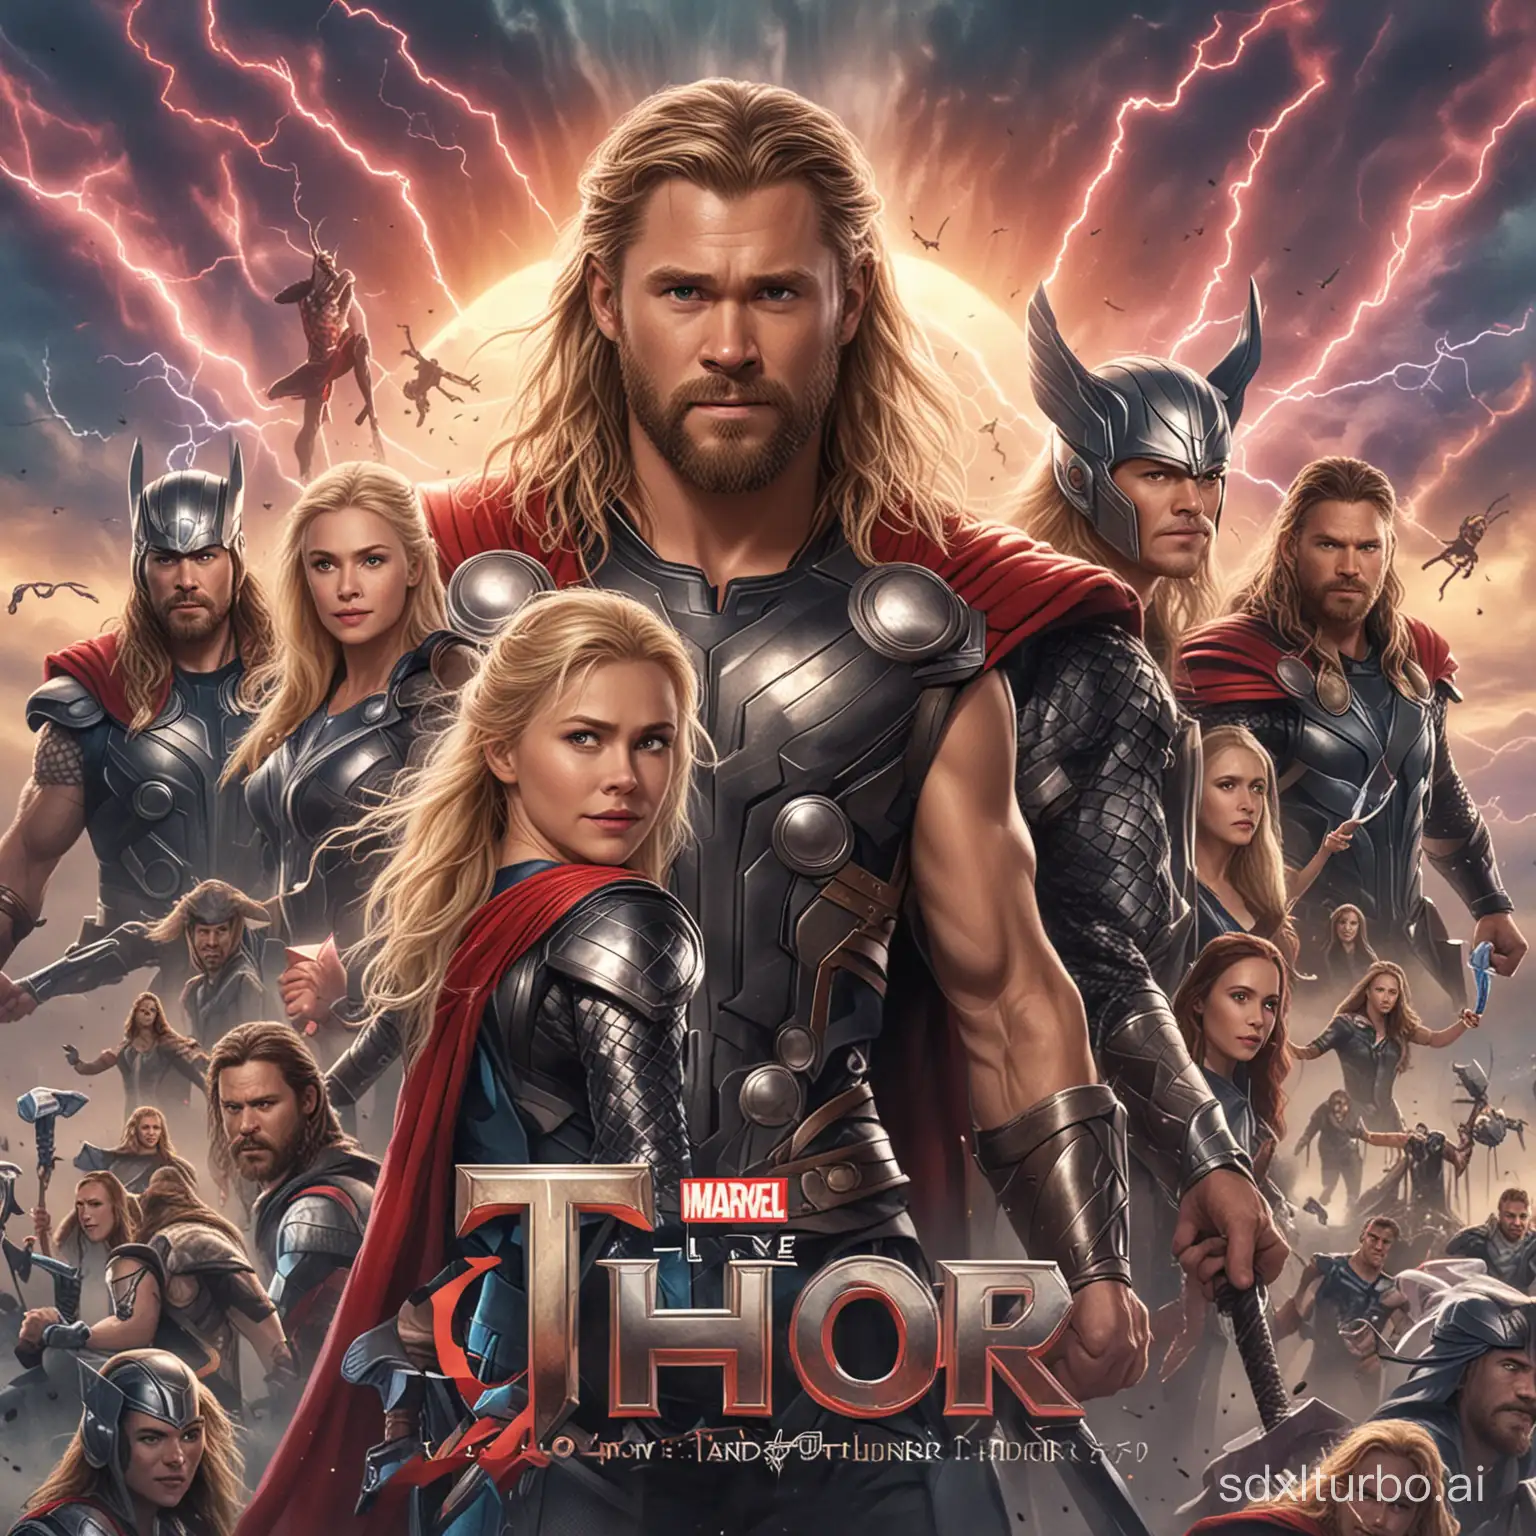 Thor-Love-and-Thunder-Movie-Poster-Art-Marvels-Asgardian-Superhero-in-Action